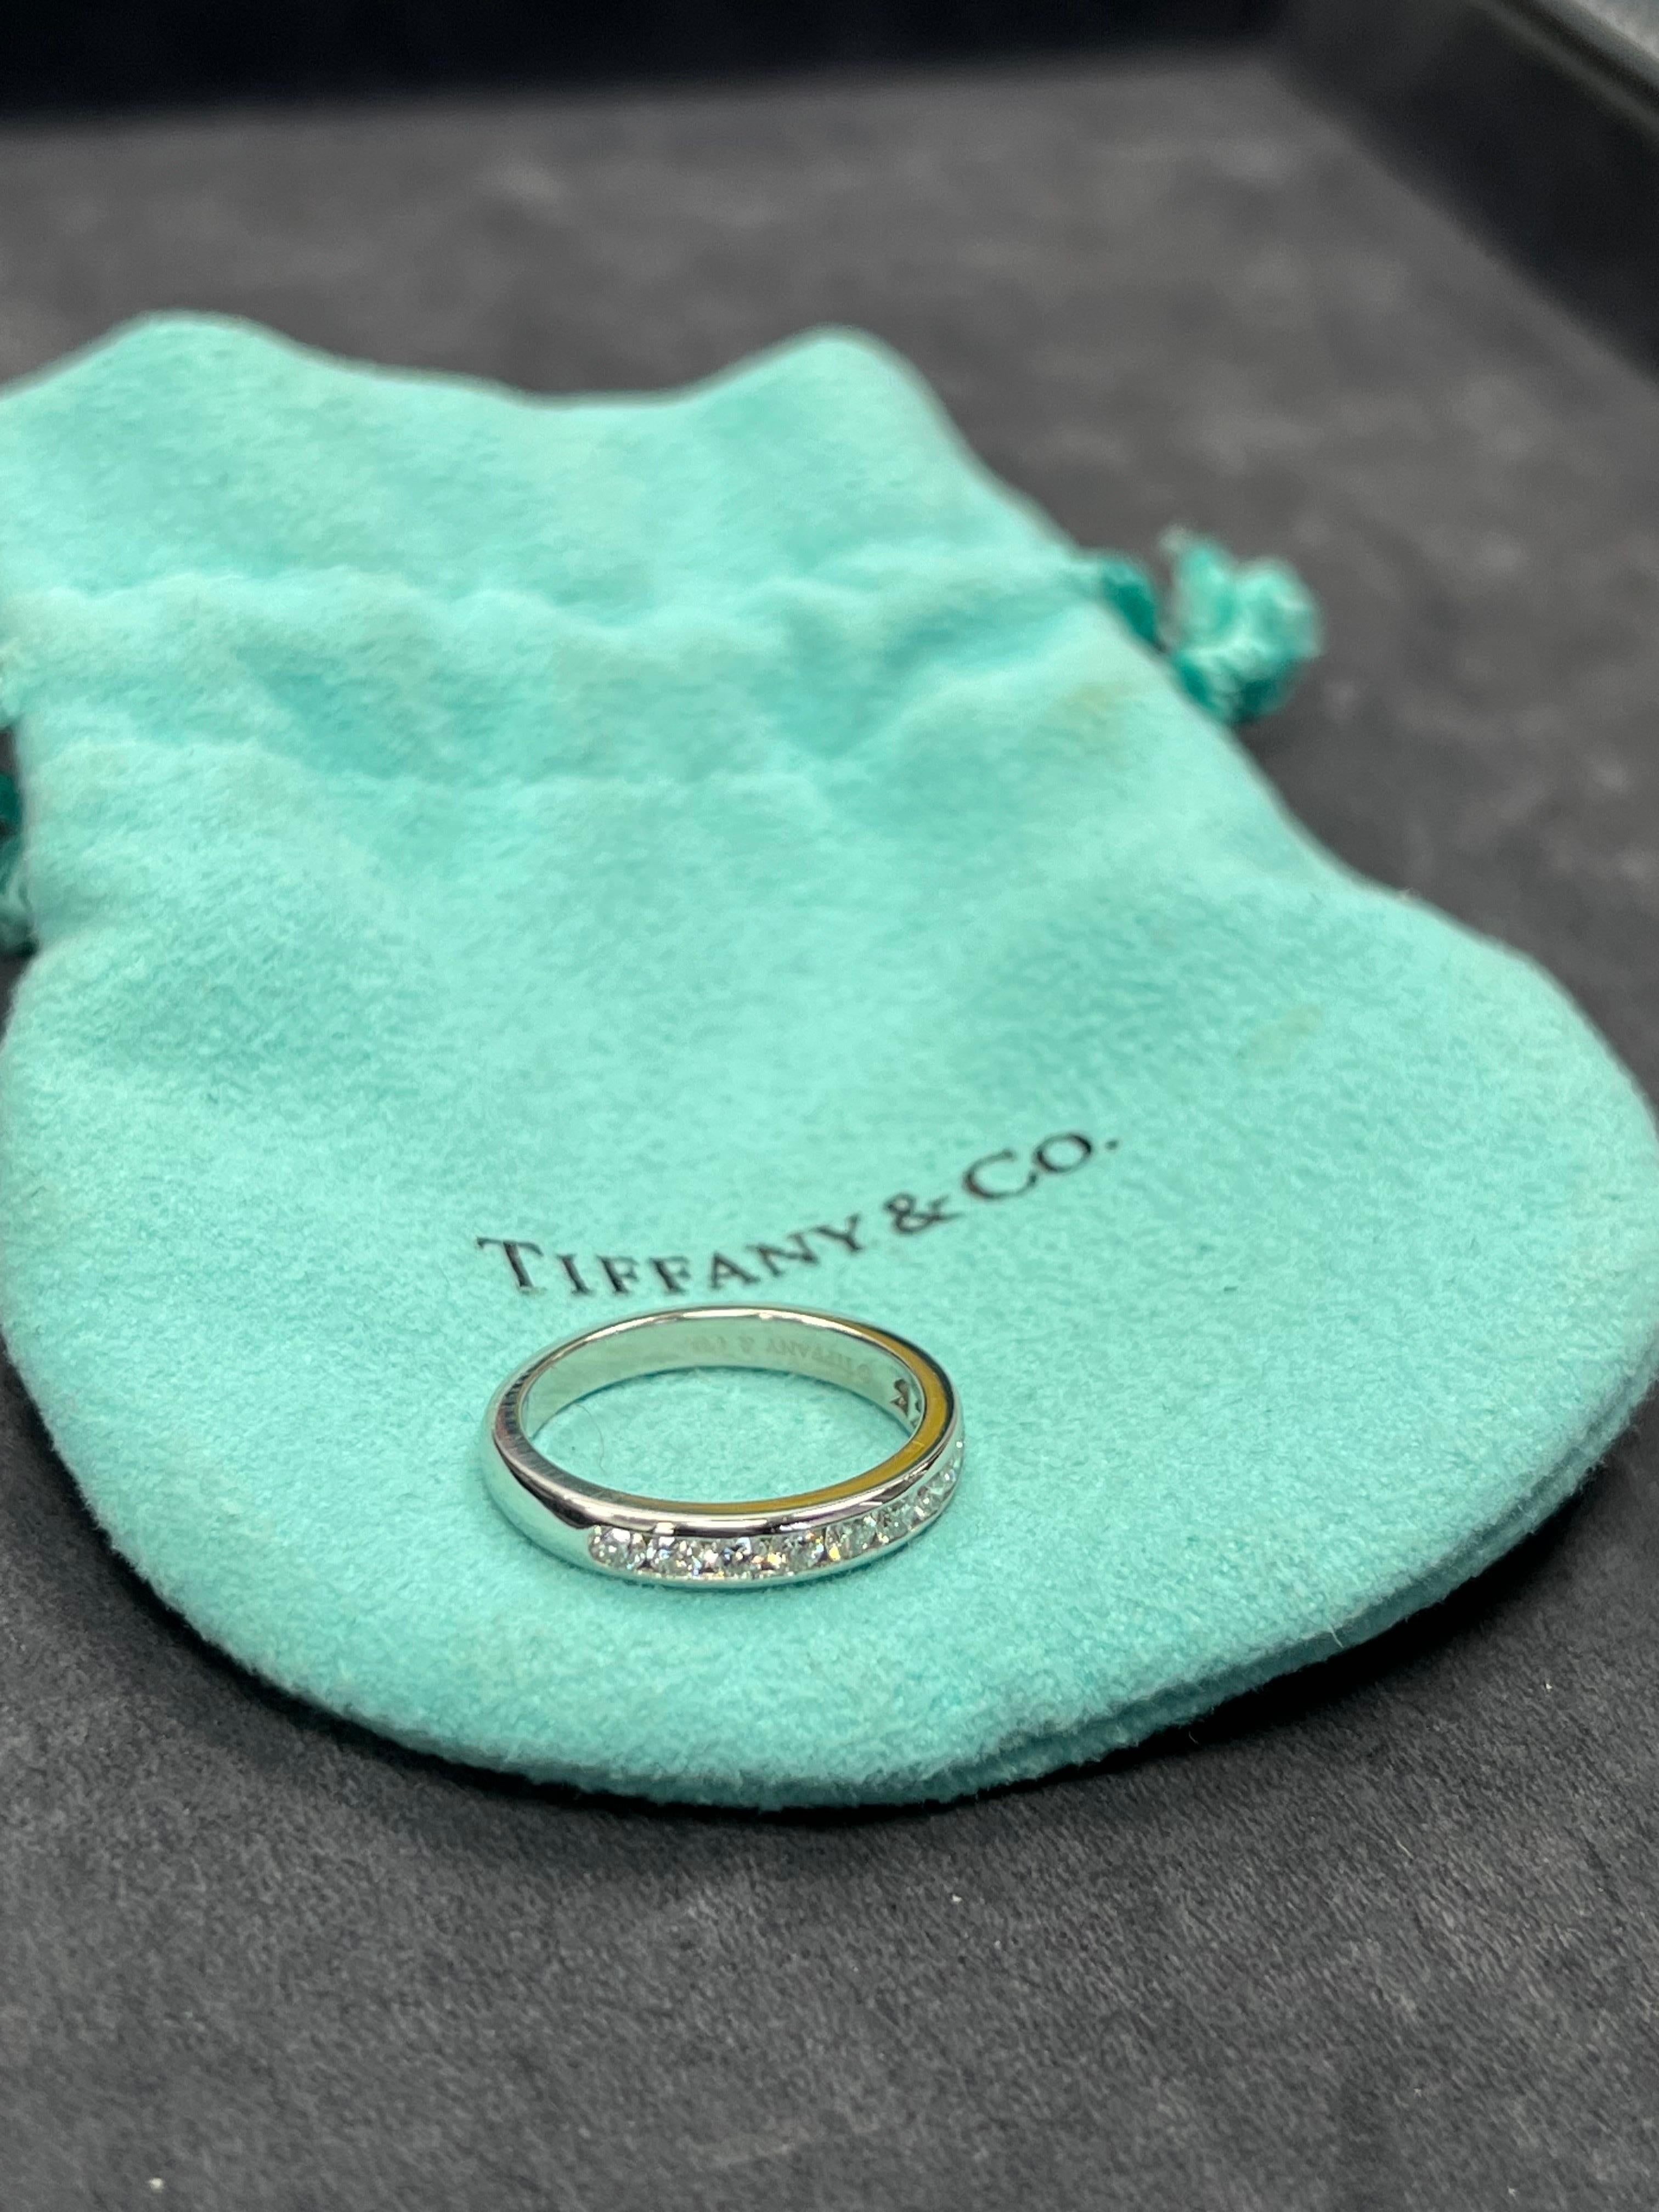 Authentic Tiffany & Company Platinum Band Channel set with 11 colorless round brilliant diamonds weighing a total of 0.17 carats. 

Ring size is 5.5 and total weight is 4.7 grams. Original Pouch included. No box, no papers.

As of September 14, 2023